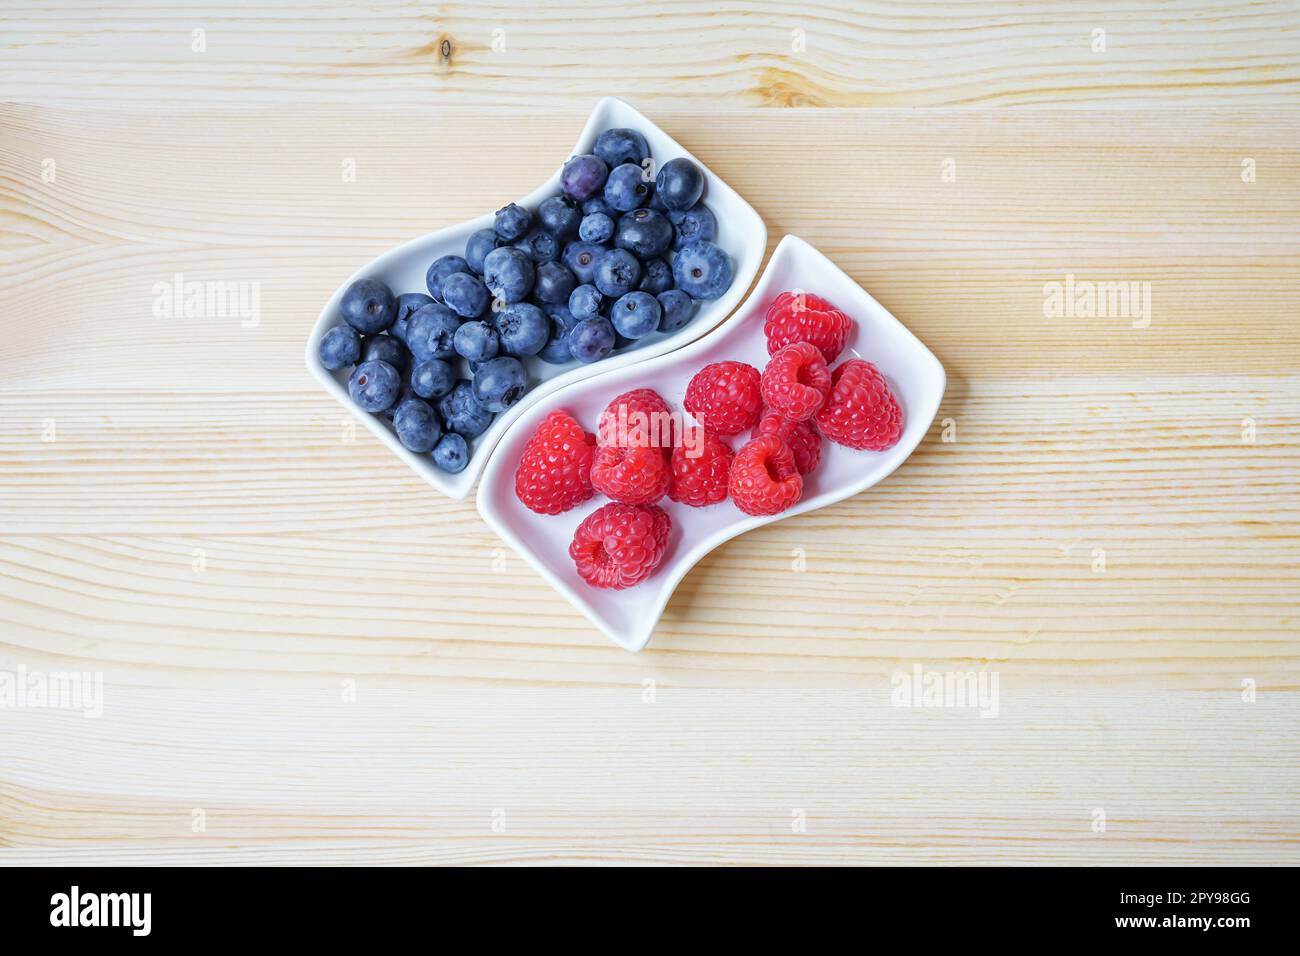 Fresh red raspberries and blueberries, still life, closeup and detail view Stock Photo